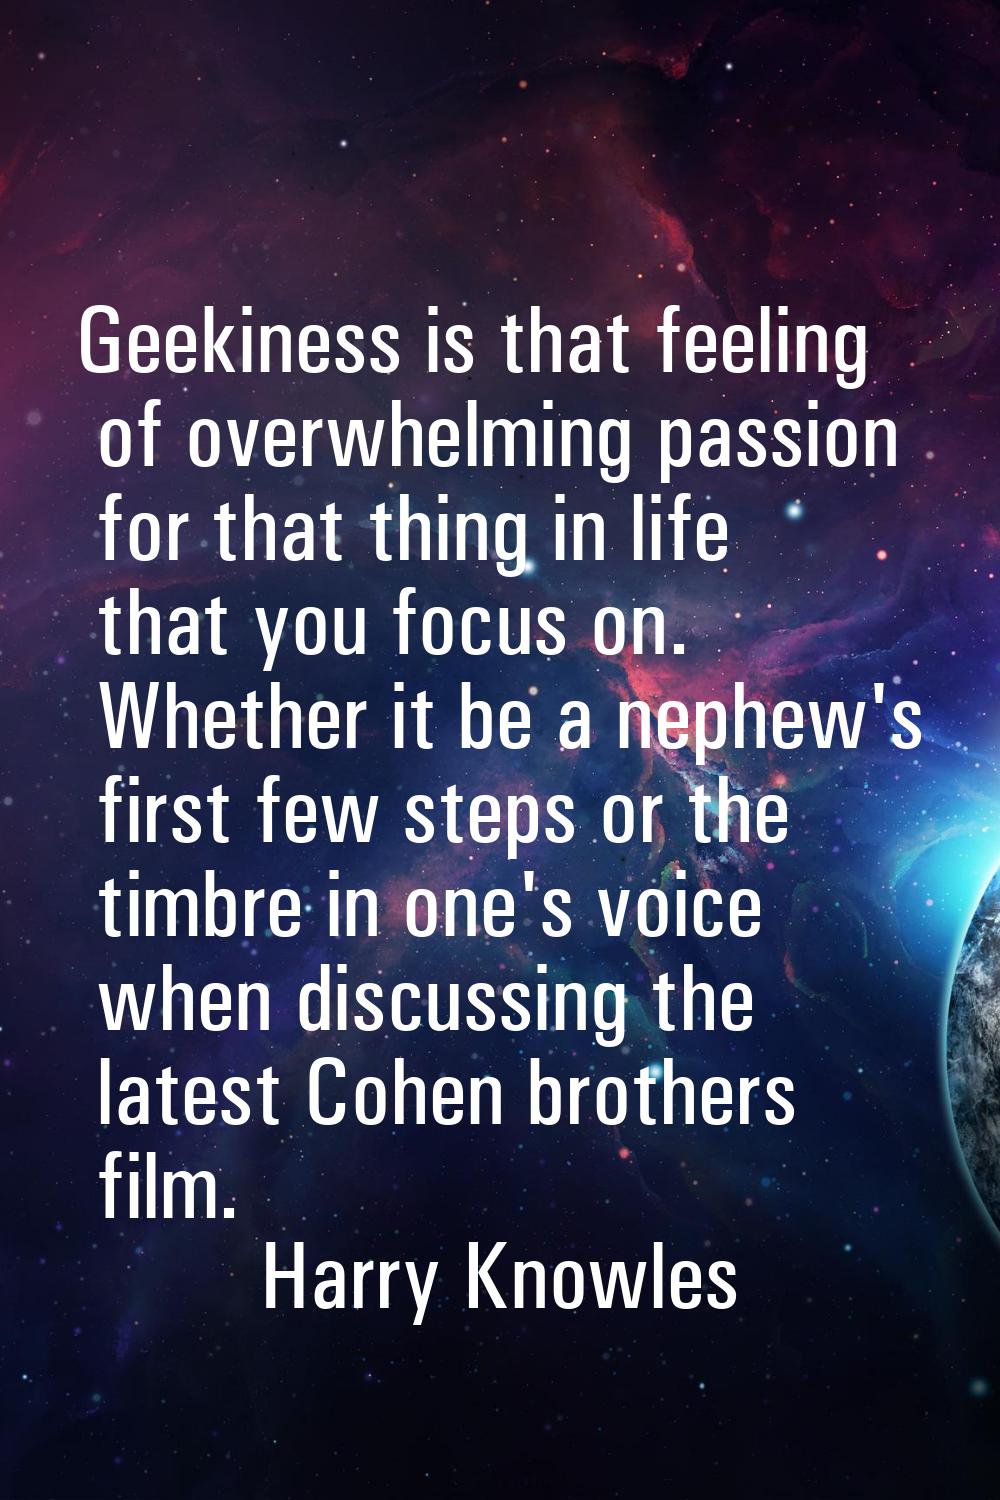 Geekiness is that feeling of overwhelming passion for that thing in life that you focus on. Whether